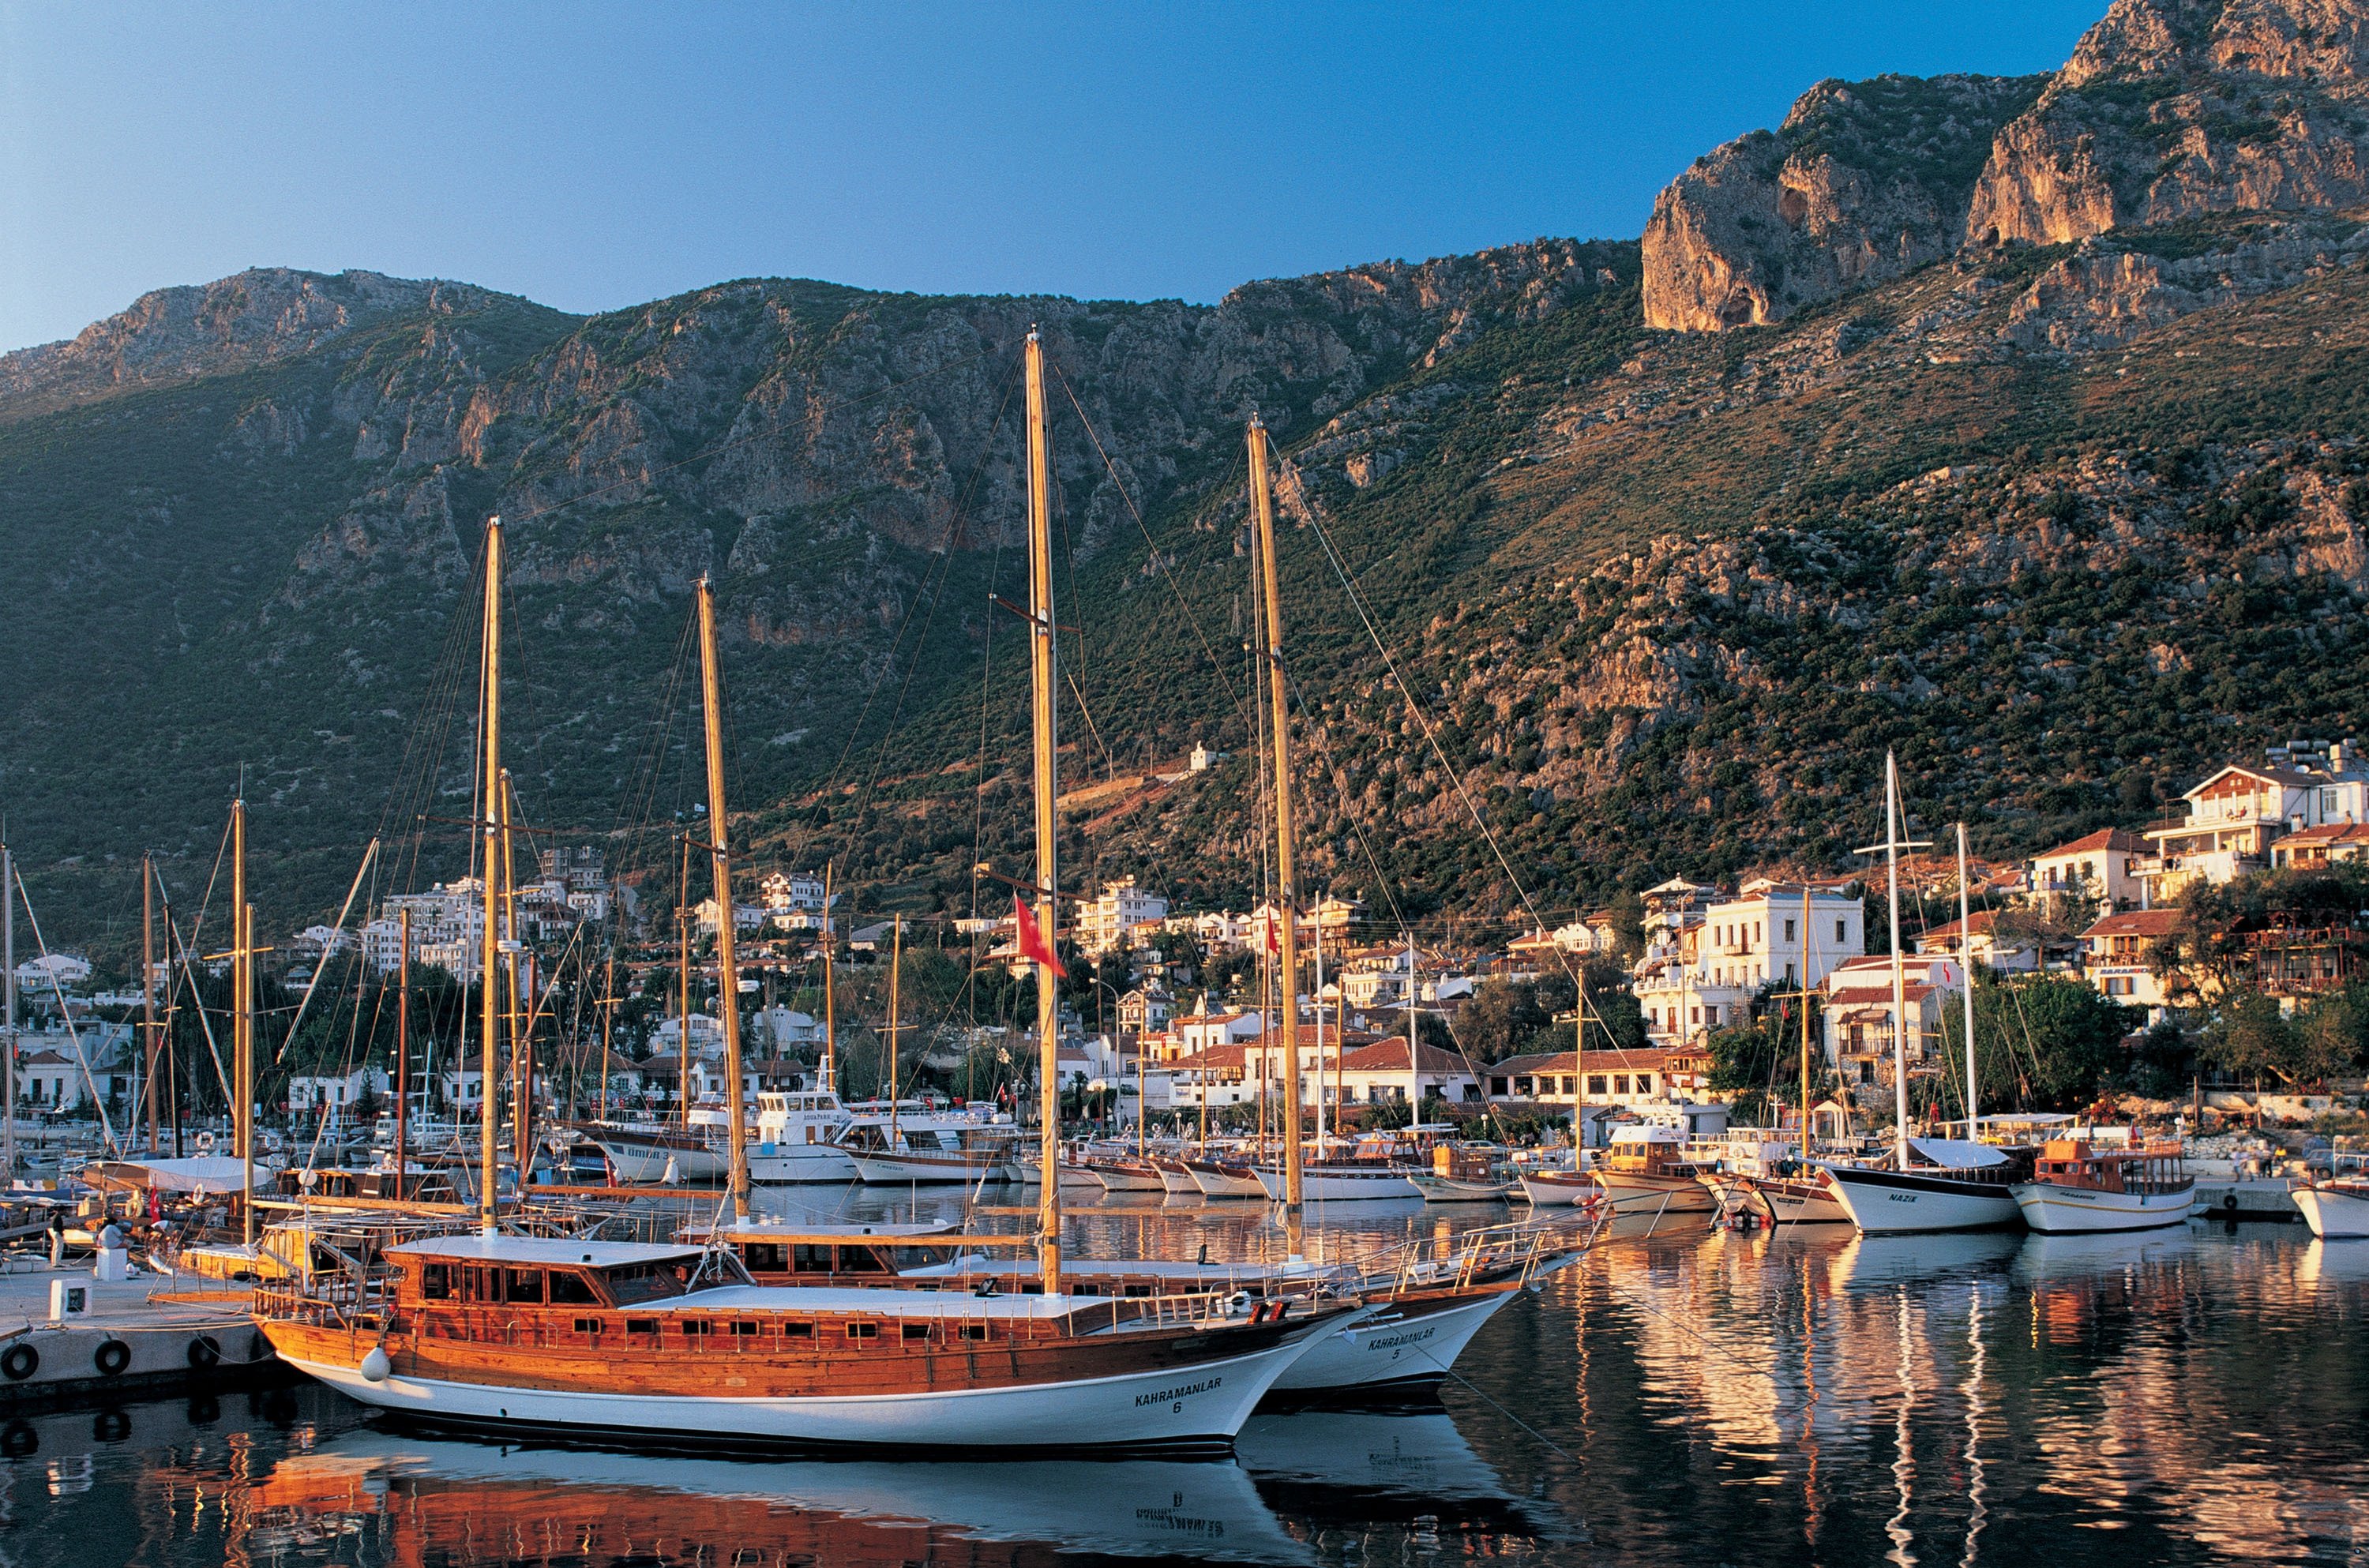 Luxury gulets at a marina in Kaş, Antalya, southern Turkey. (Universal Images Group via Getty Images)